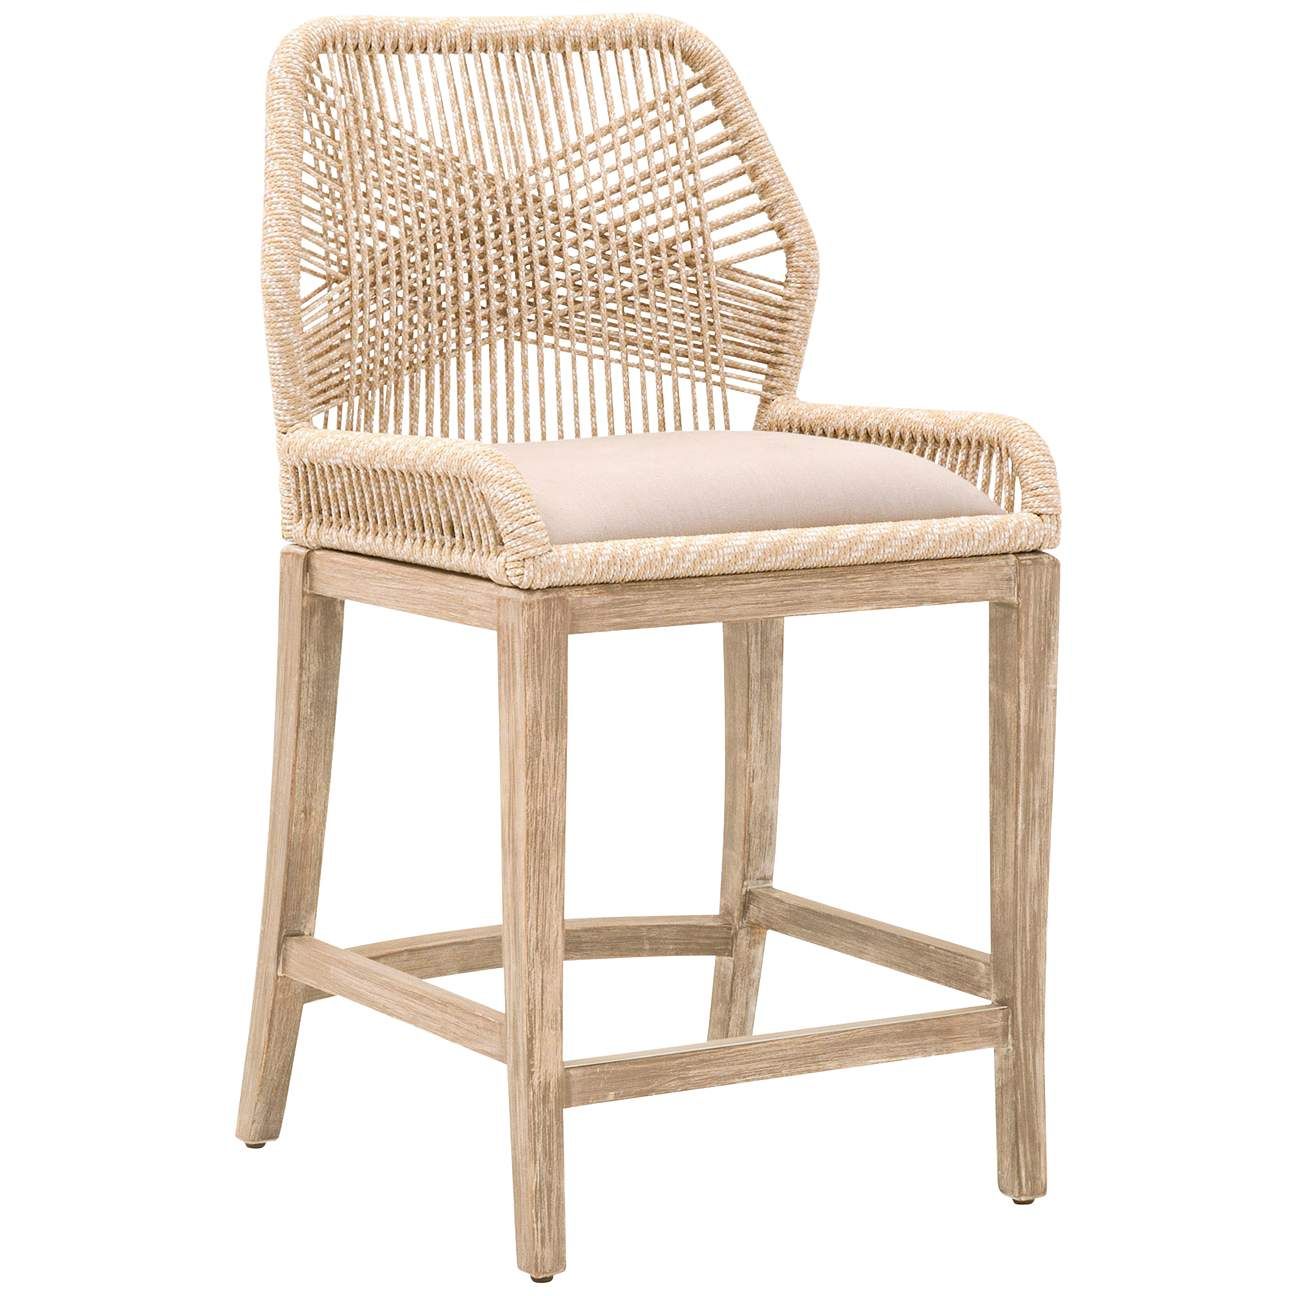 Loom 26" Sand Rope and Stone Wash Counter Stool | Lamps Plus